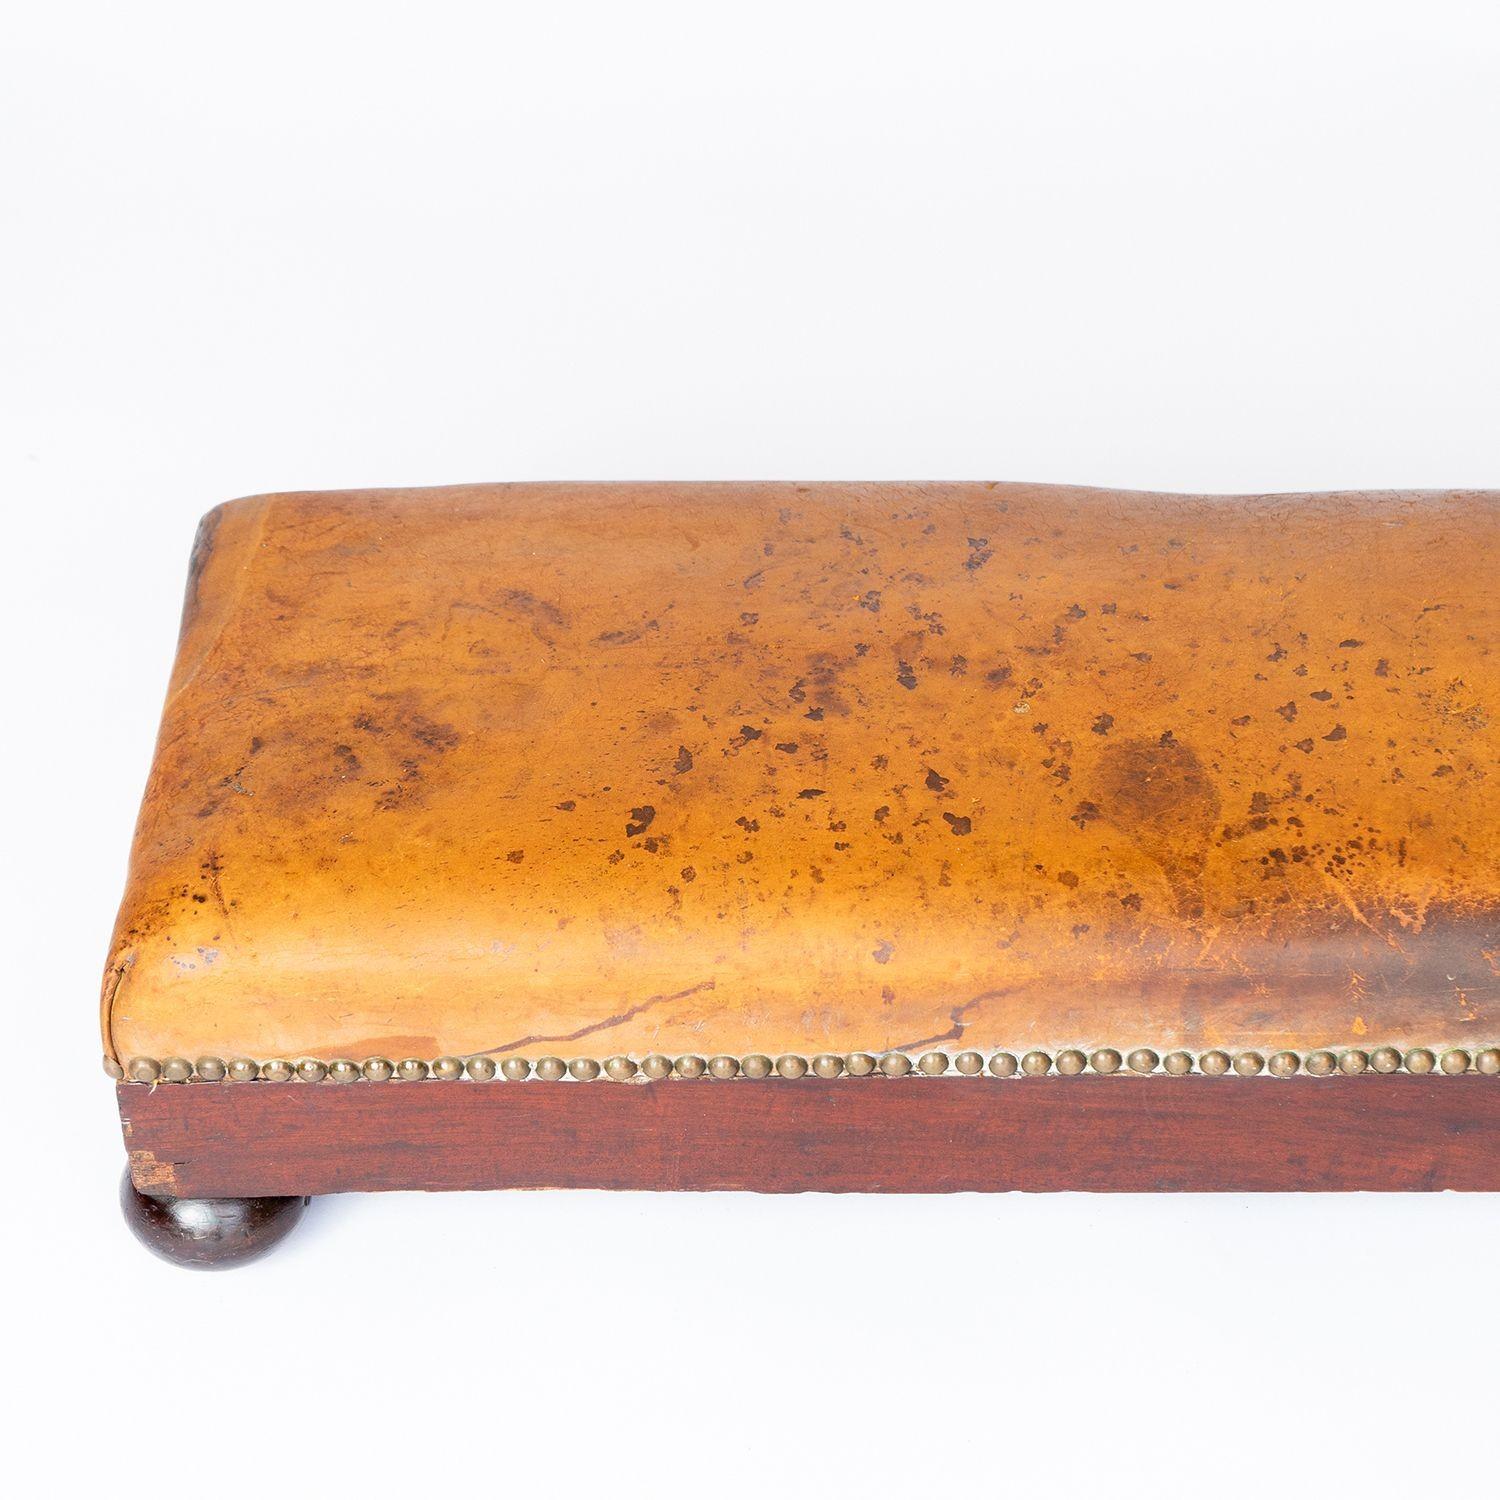 Brass Antique Edwardian Leather Fireside Fender Foot Stool, Early 20th Century